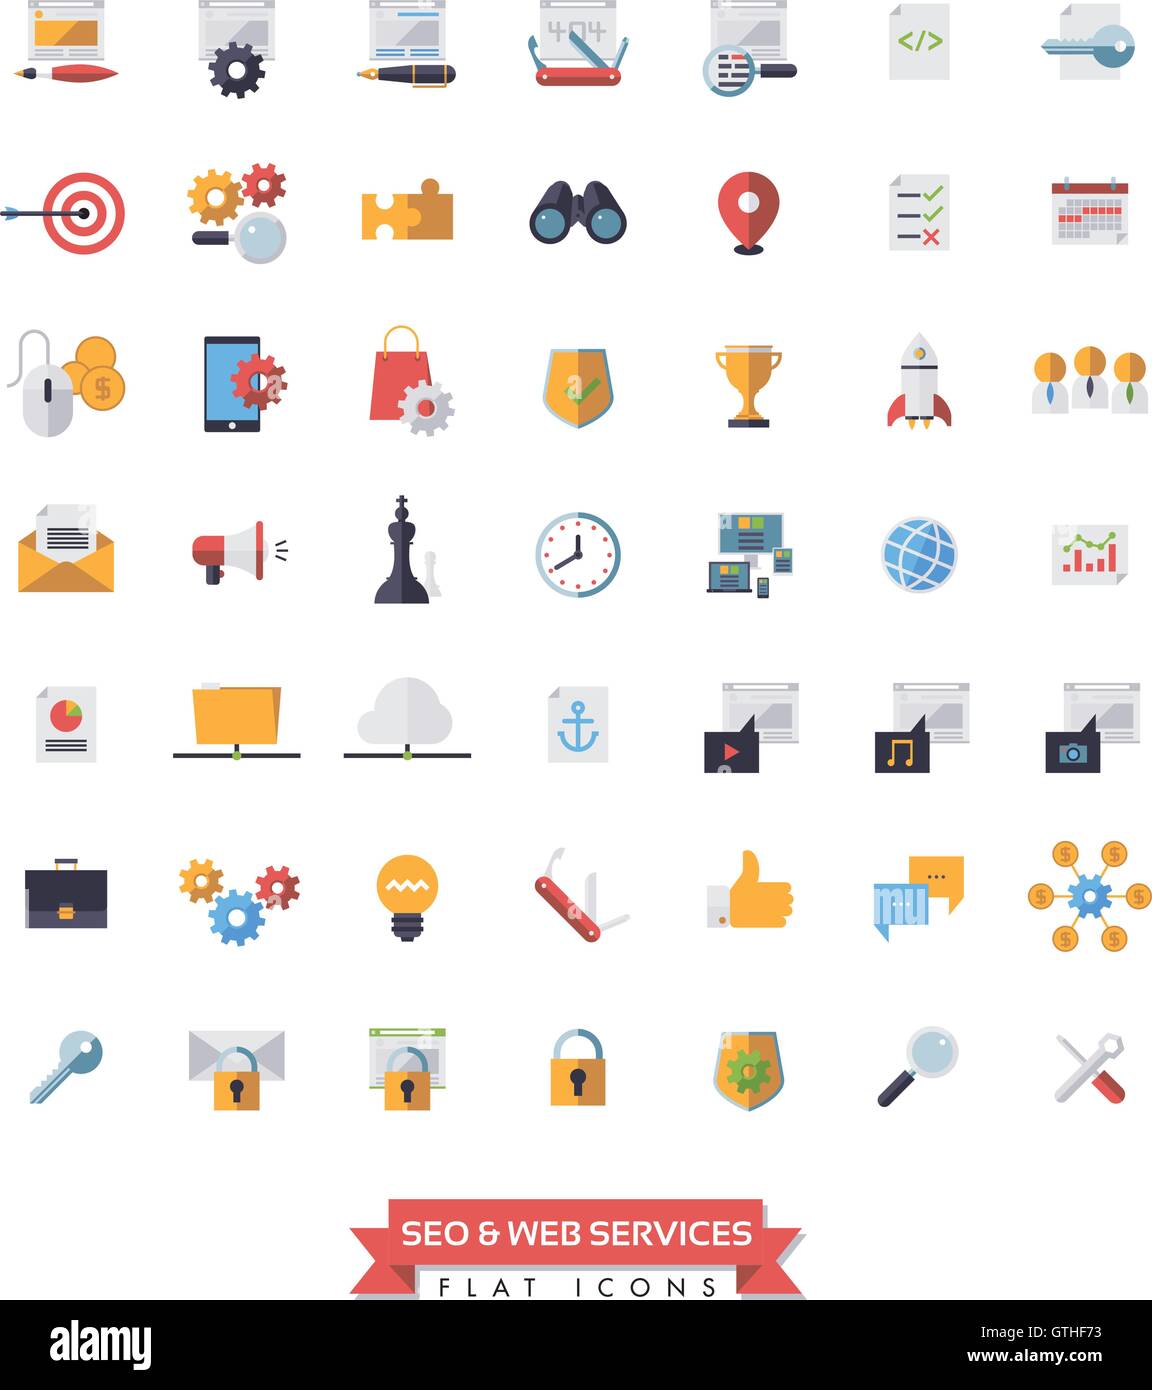 Collection of 49 flat design SEO and Web Services icons Stock Vector